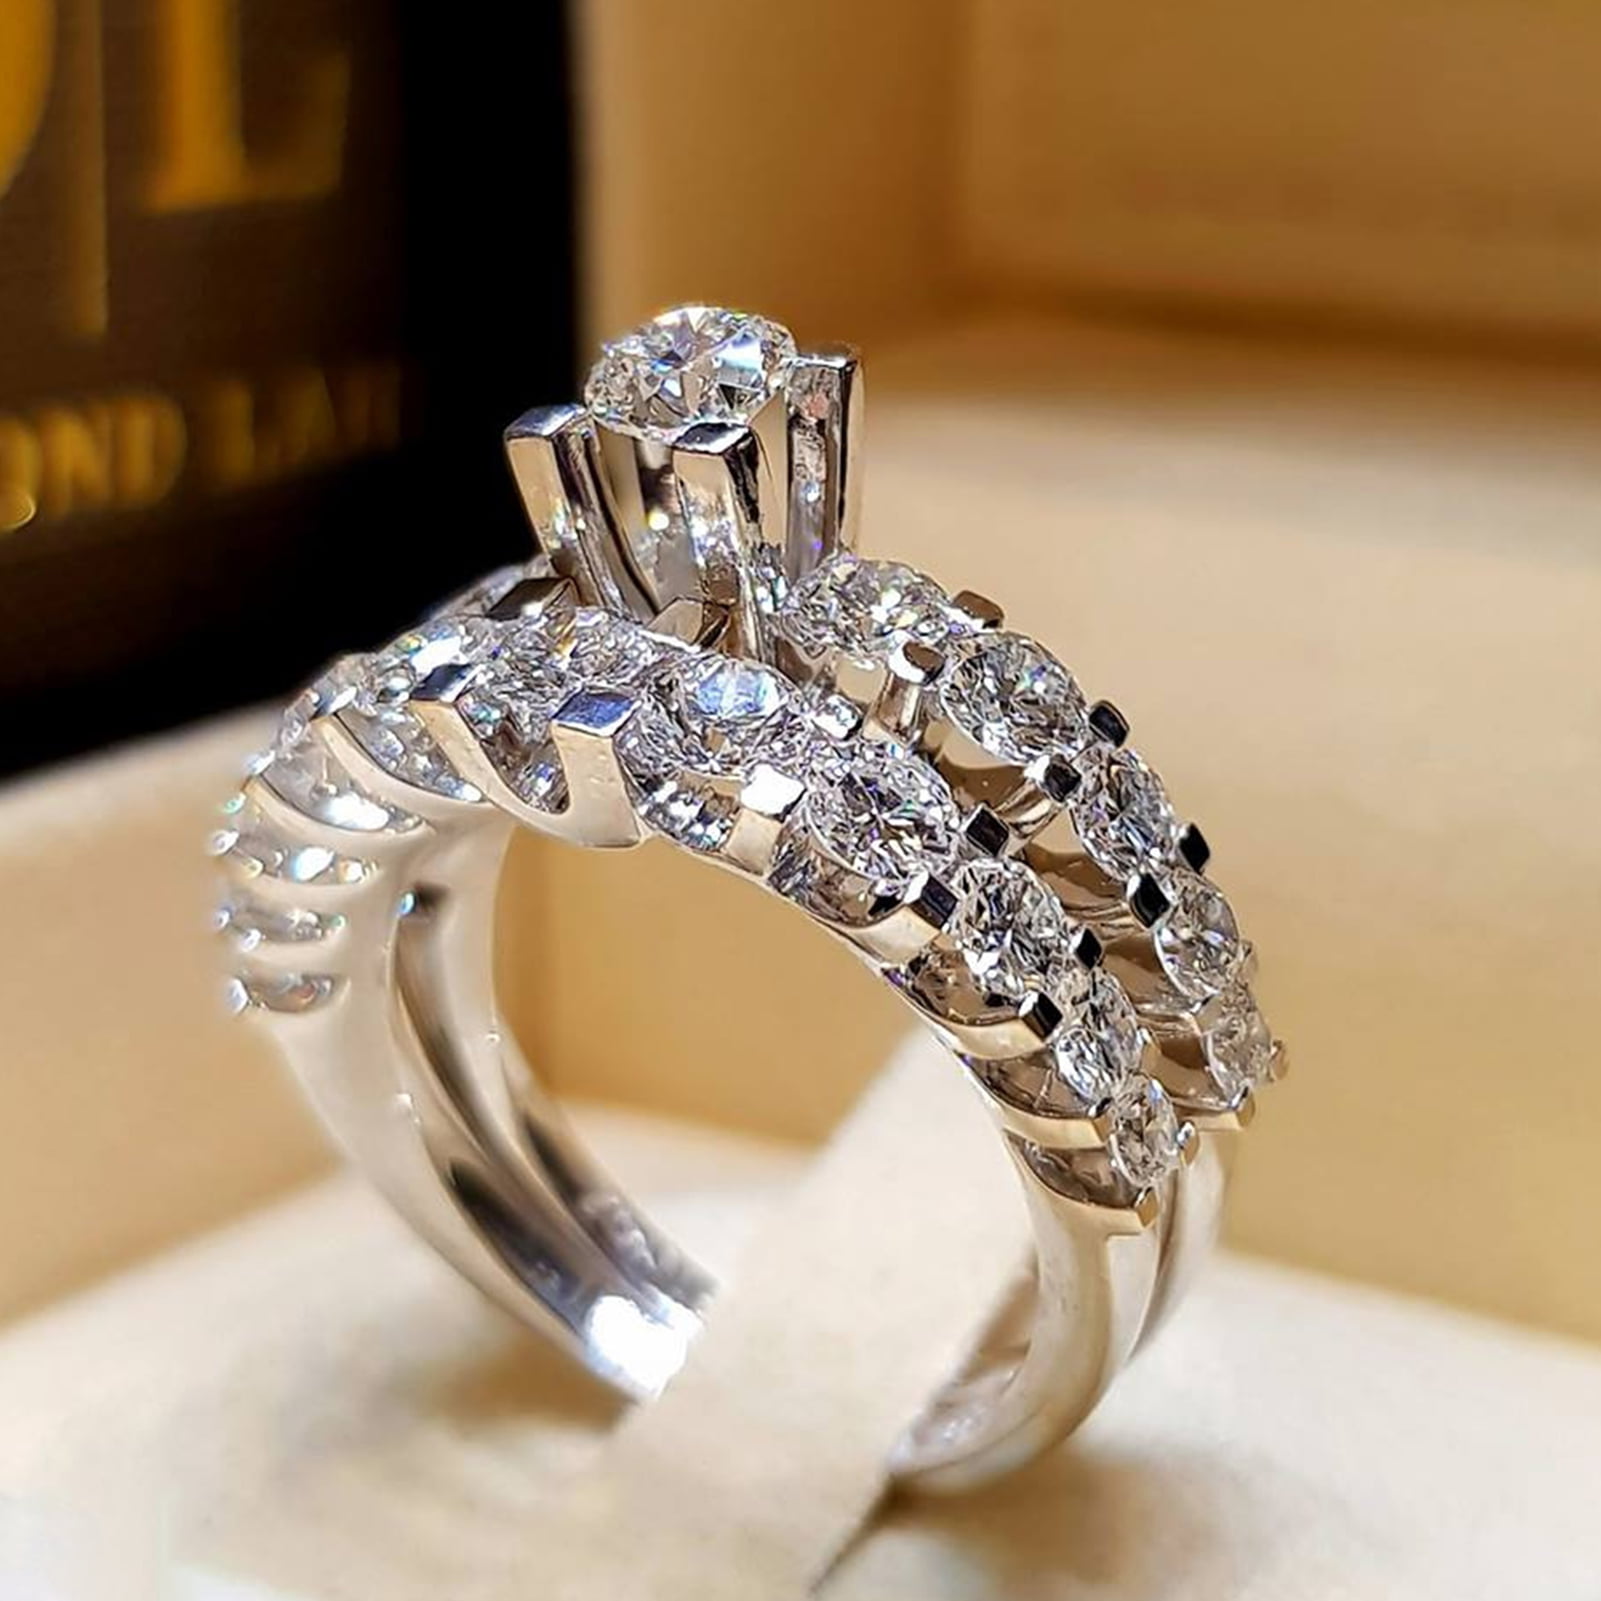 A Symbol of Love: The Heart Shaped Diamond Ring – Mark Broumand